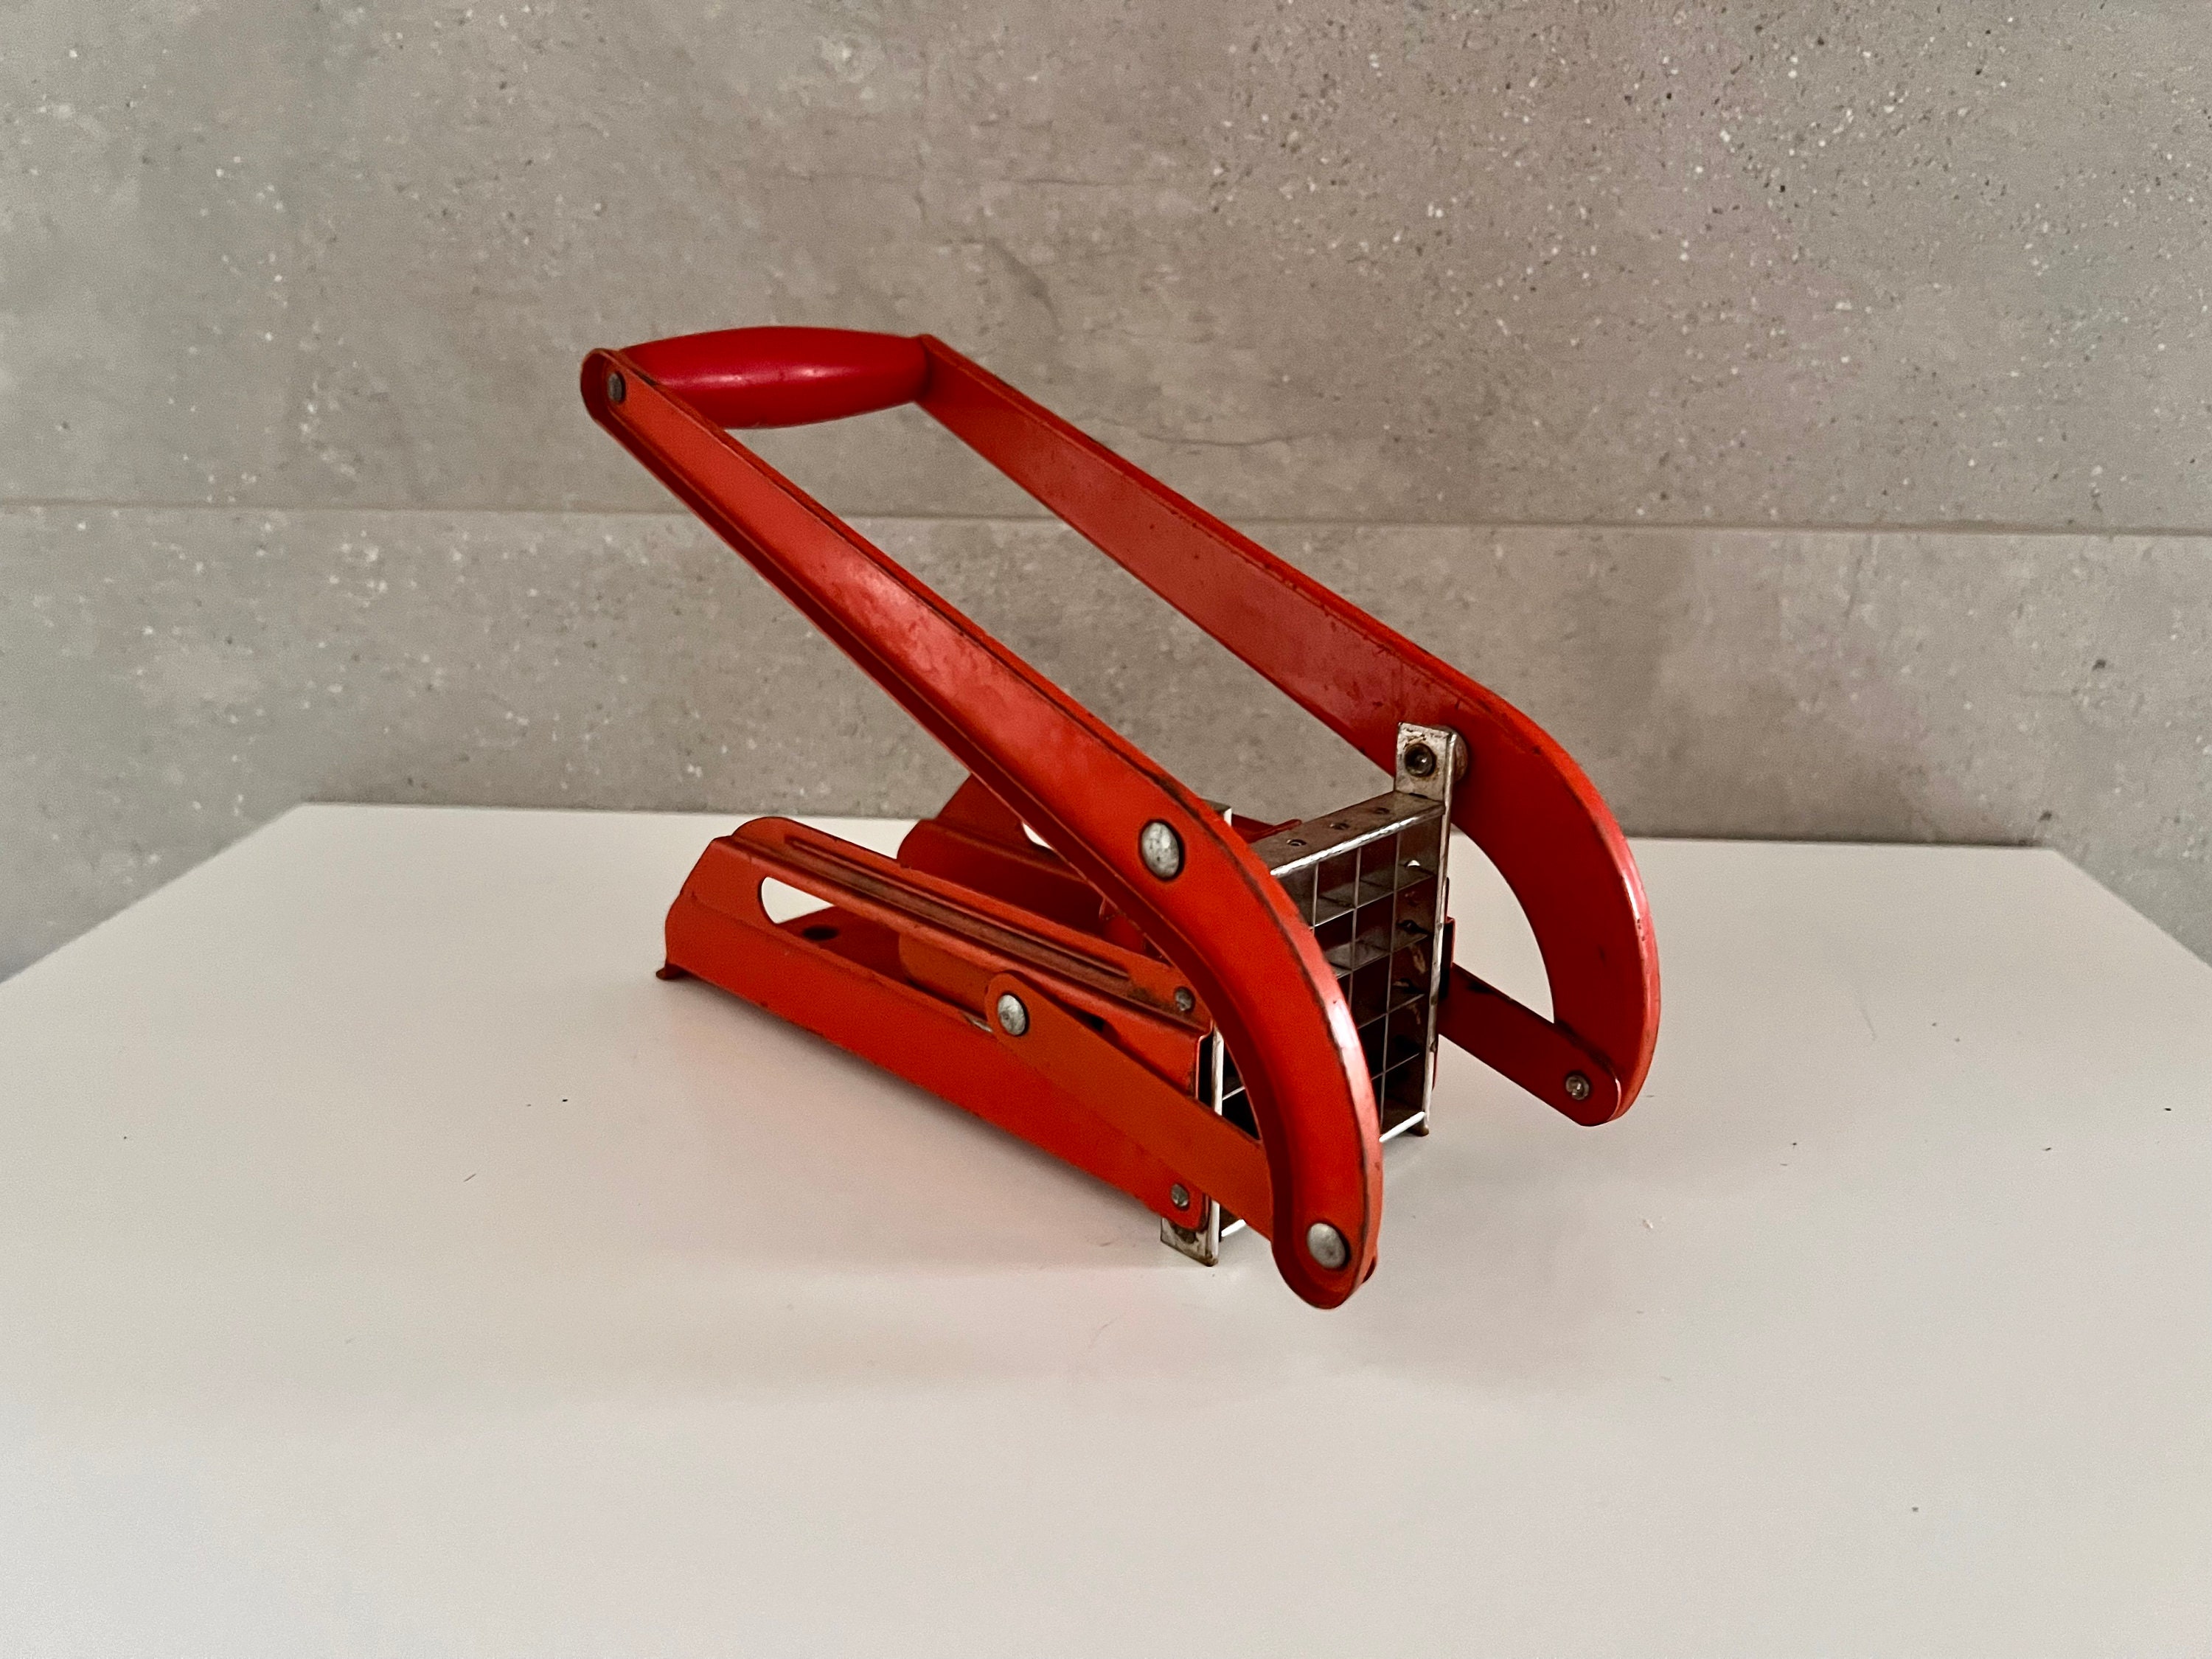 Potato Chopper Cutter 1950's French Fry Slicer Retro Kitchen Hand Tool  Faded Red Wooden Handles Vegetable Dicer Cooking Vintage Decor 